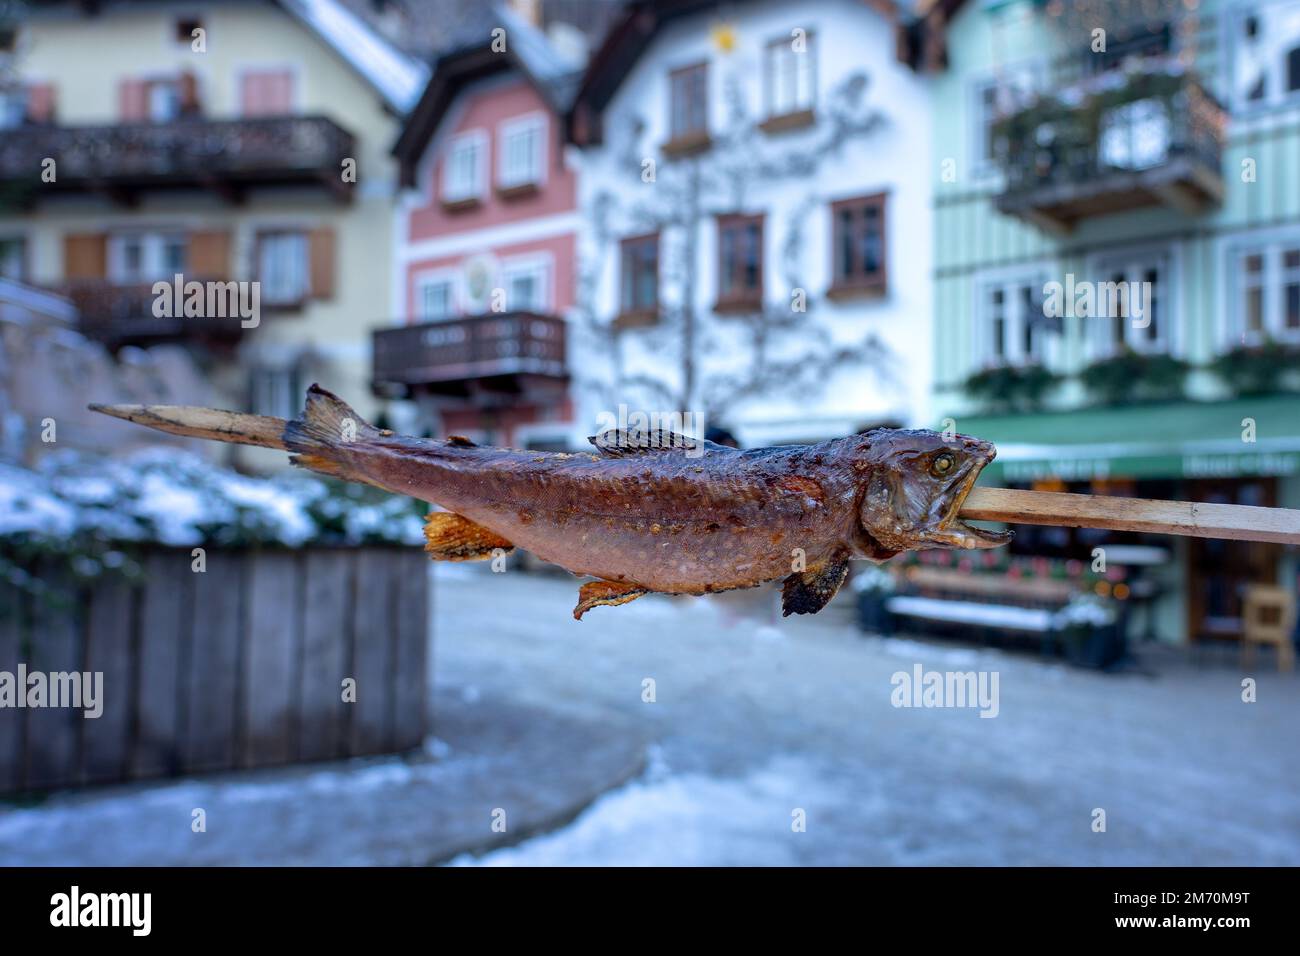 eating skewered fish in Hallstatt at the christmas market on main square . Stock Photo